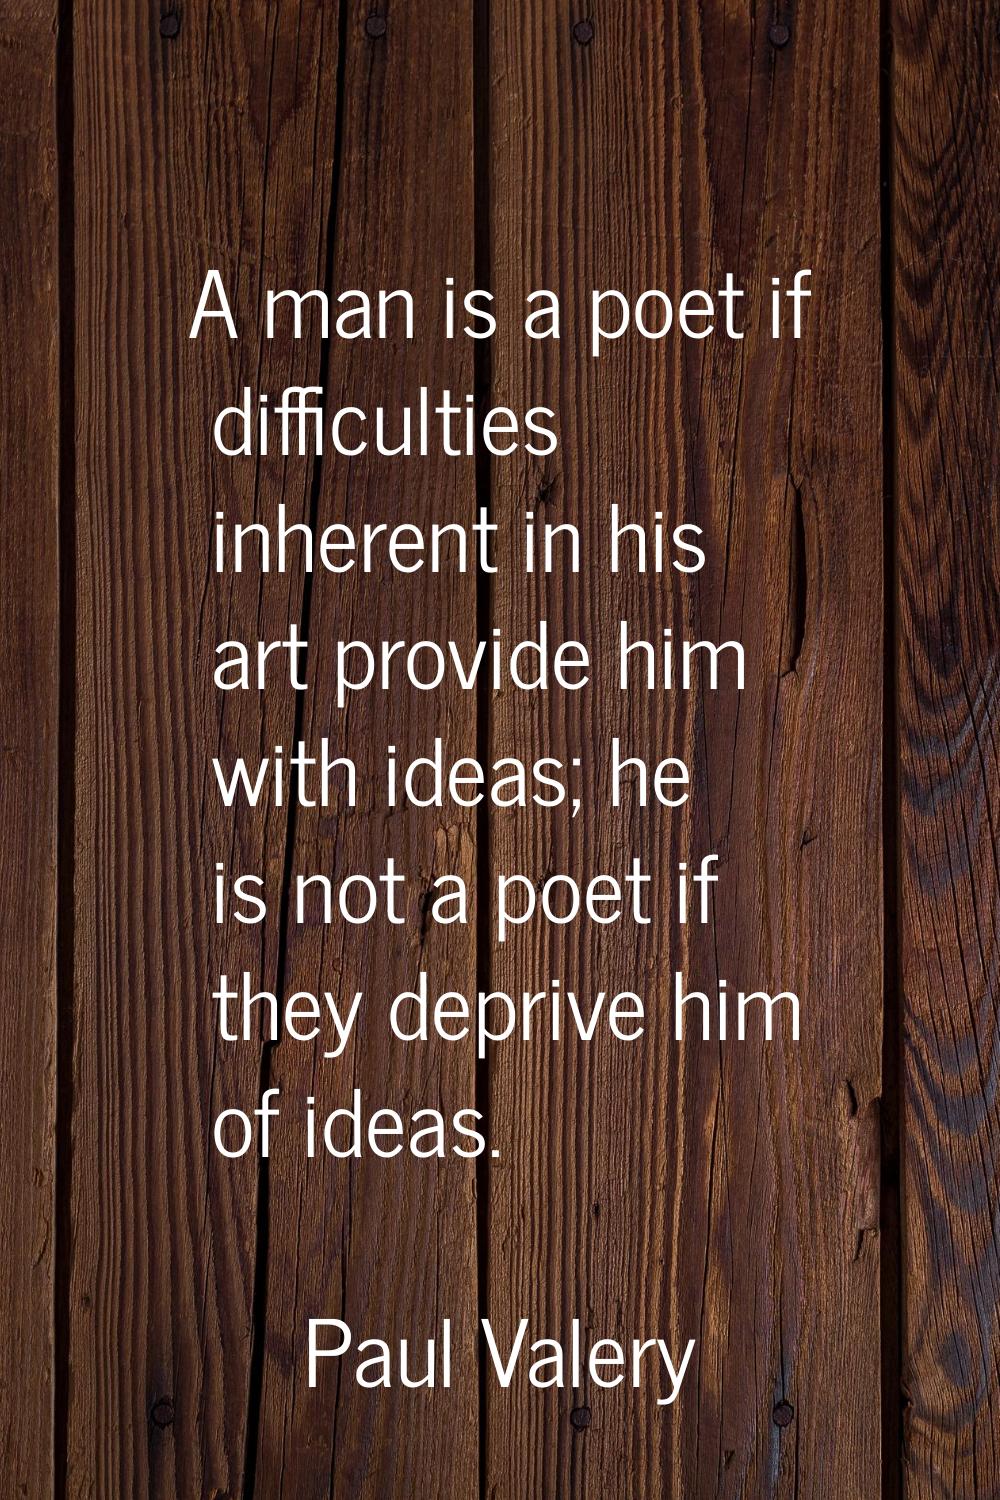 A man is a poet if difficulties inherent in his art provide him with ideas; he is not a poet if the